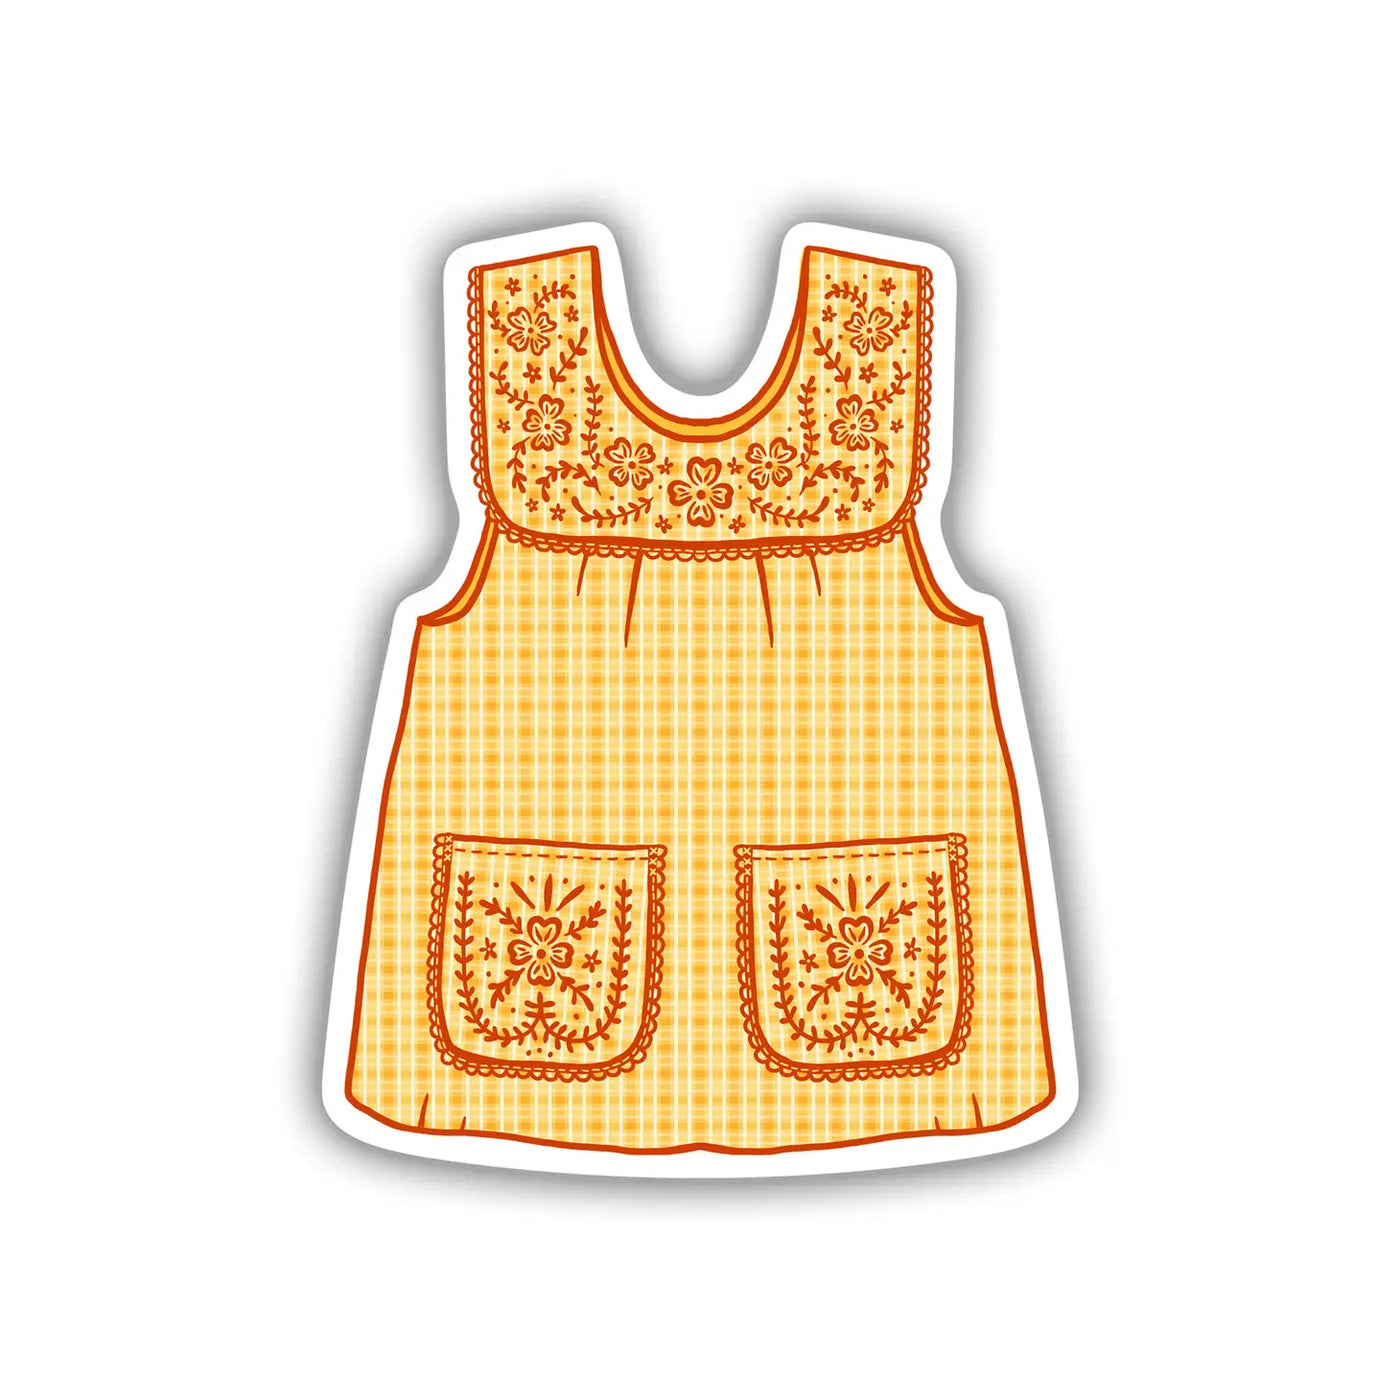 Vinyl sticker of a yellow traditional Mexican apron called a mandil.